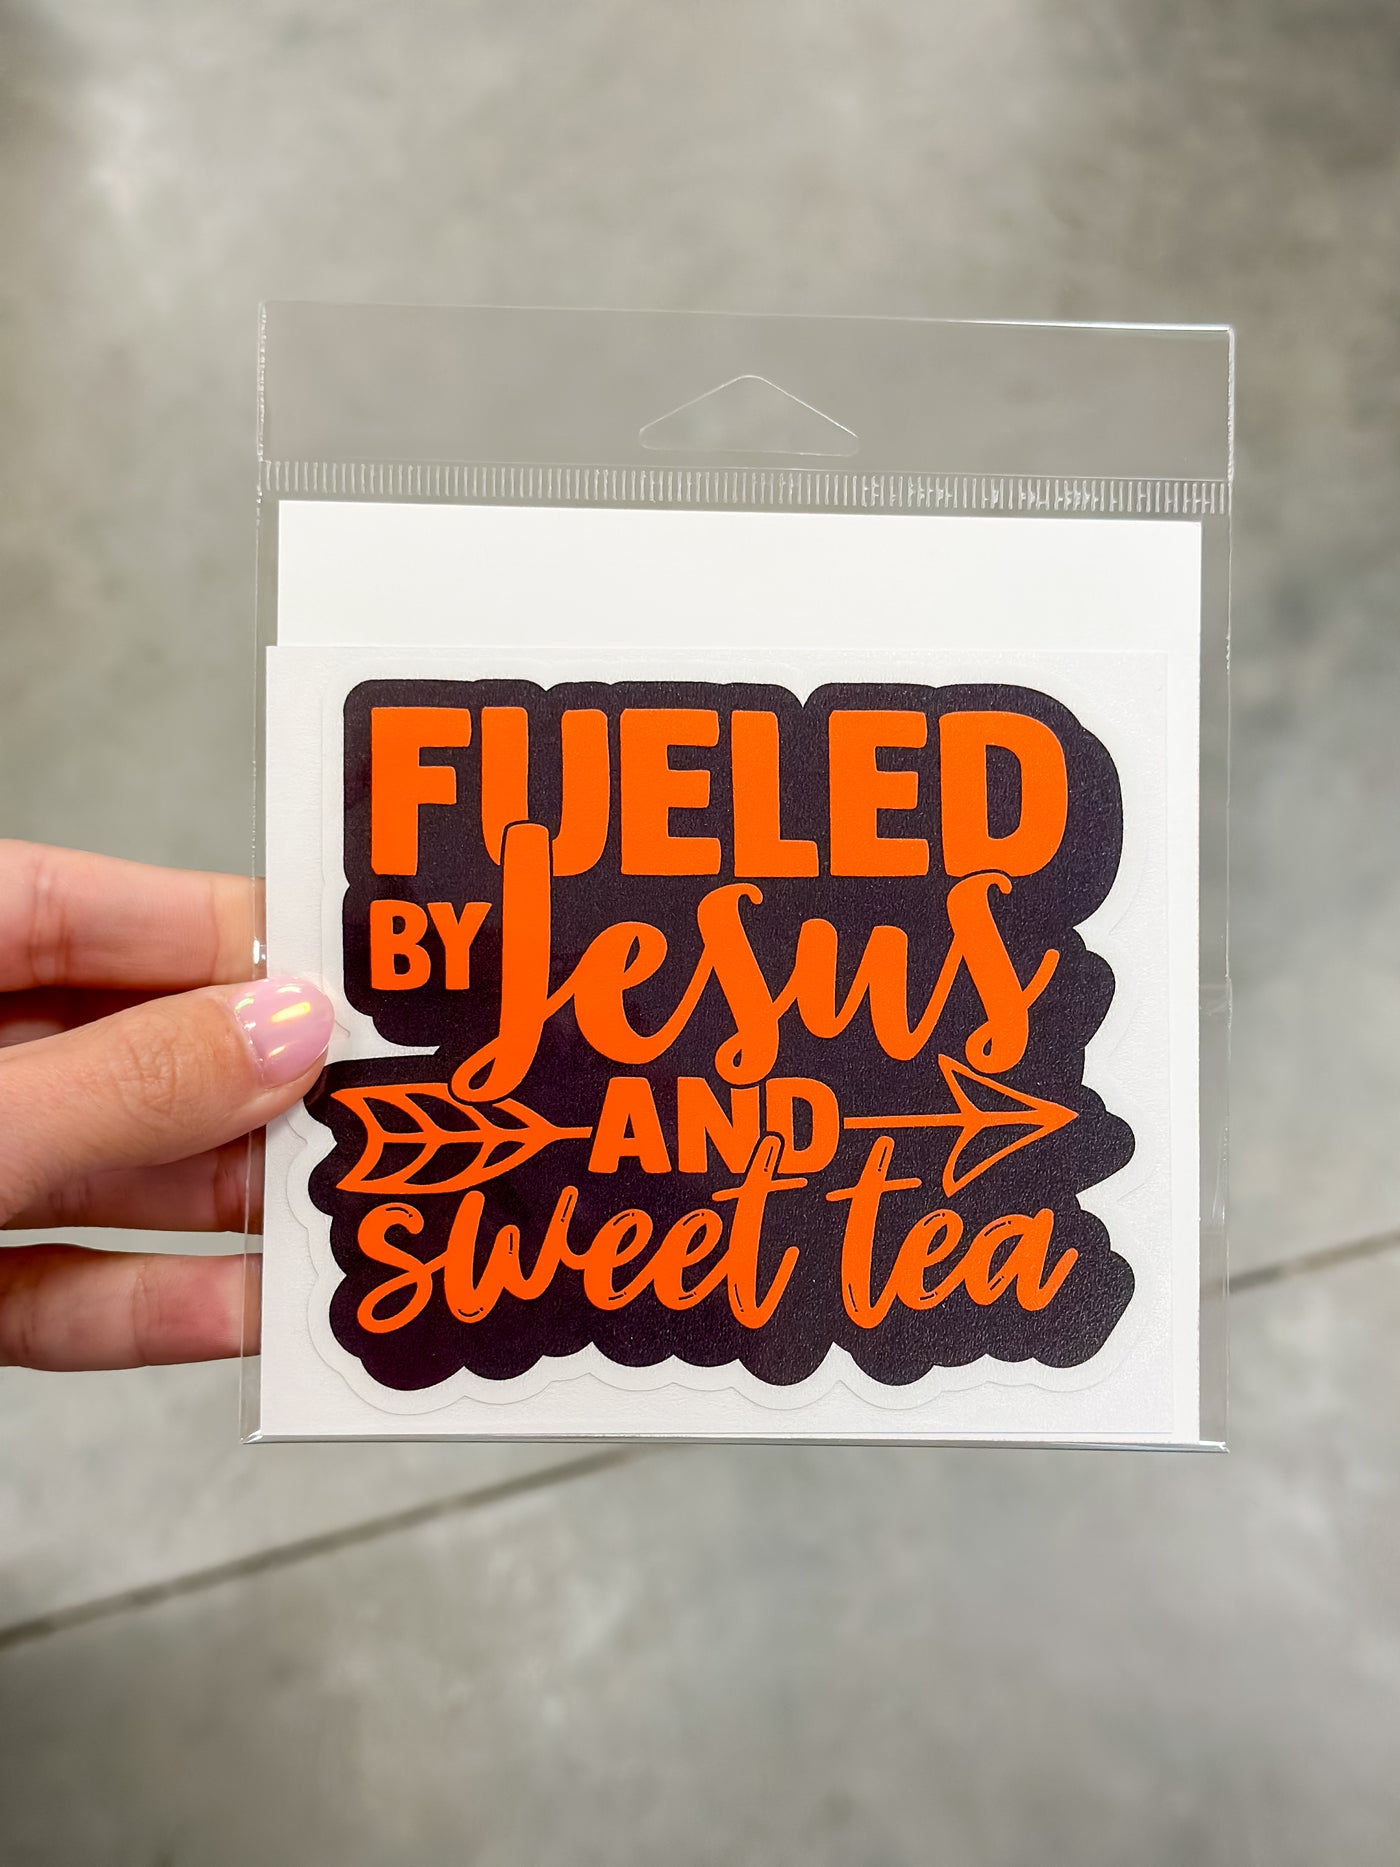 Fueled by Jesus and sweet tea Sticker